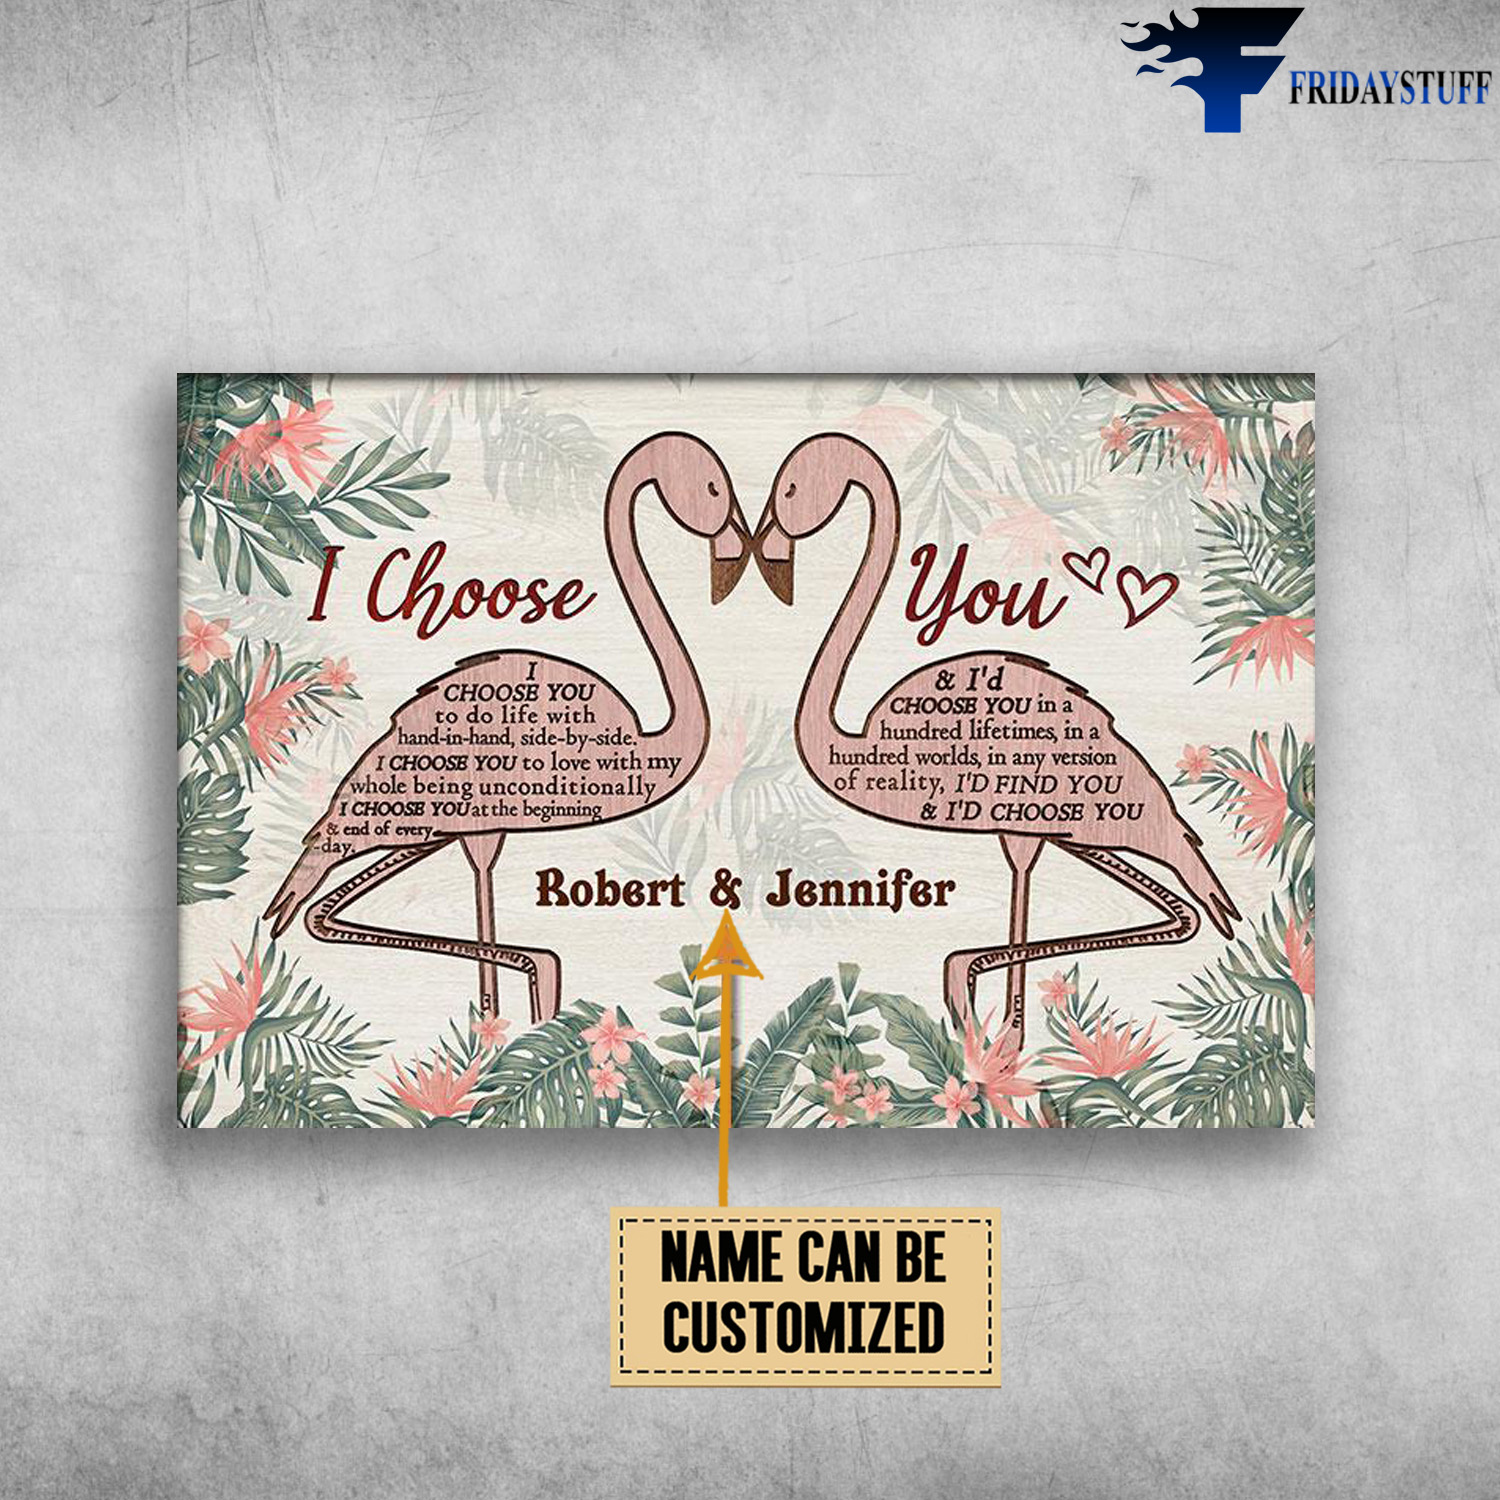 Couple Flamingo, I Choose You, To Do Life With Hand In Hand, Side By Side, I Choose You To Love With My Whole Being Unconditionally, I Choose You, At The Beginning And End Of Everyday, And I’d Choose You In A Hundred Lifetimes